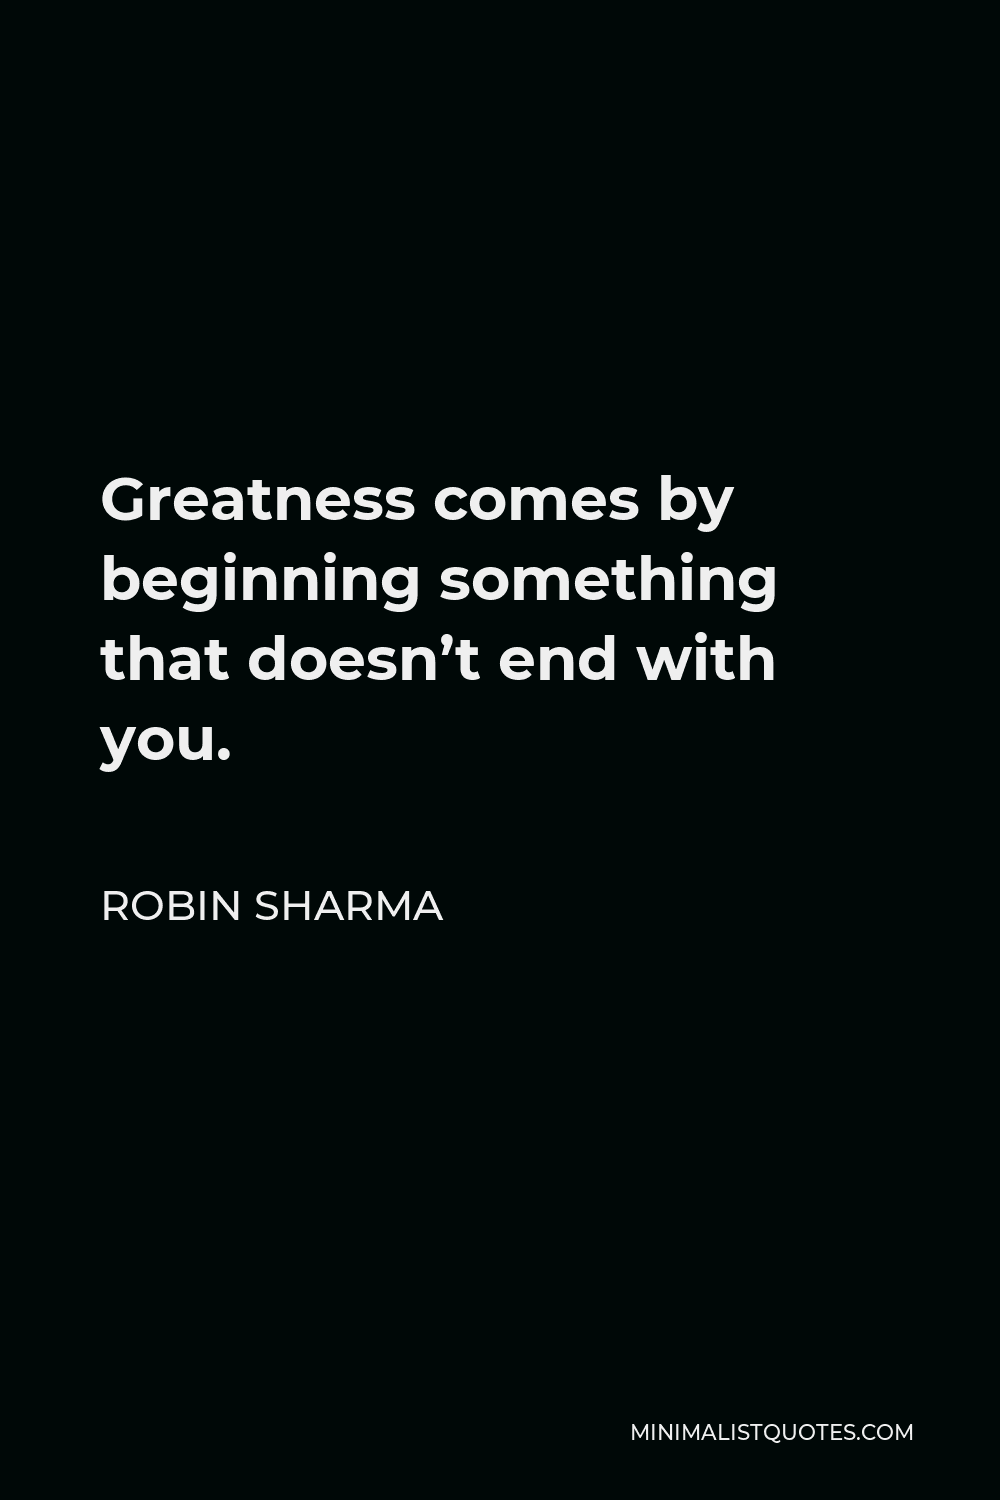 Robin Sharma Quote - Greatness comes by beginning something that doesn’t end with you.